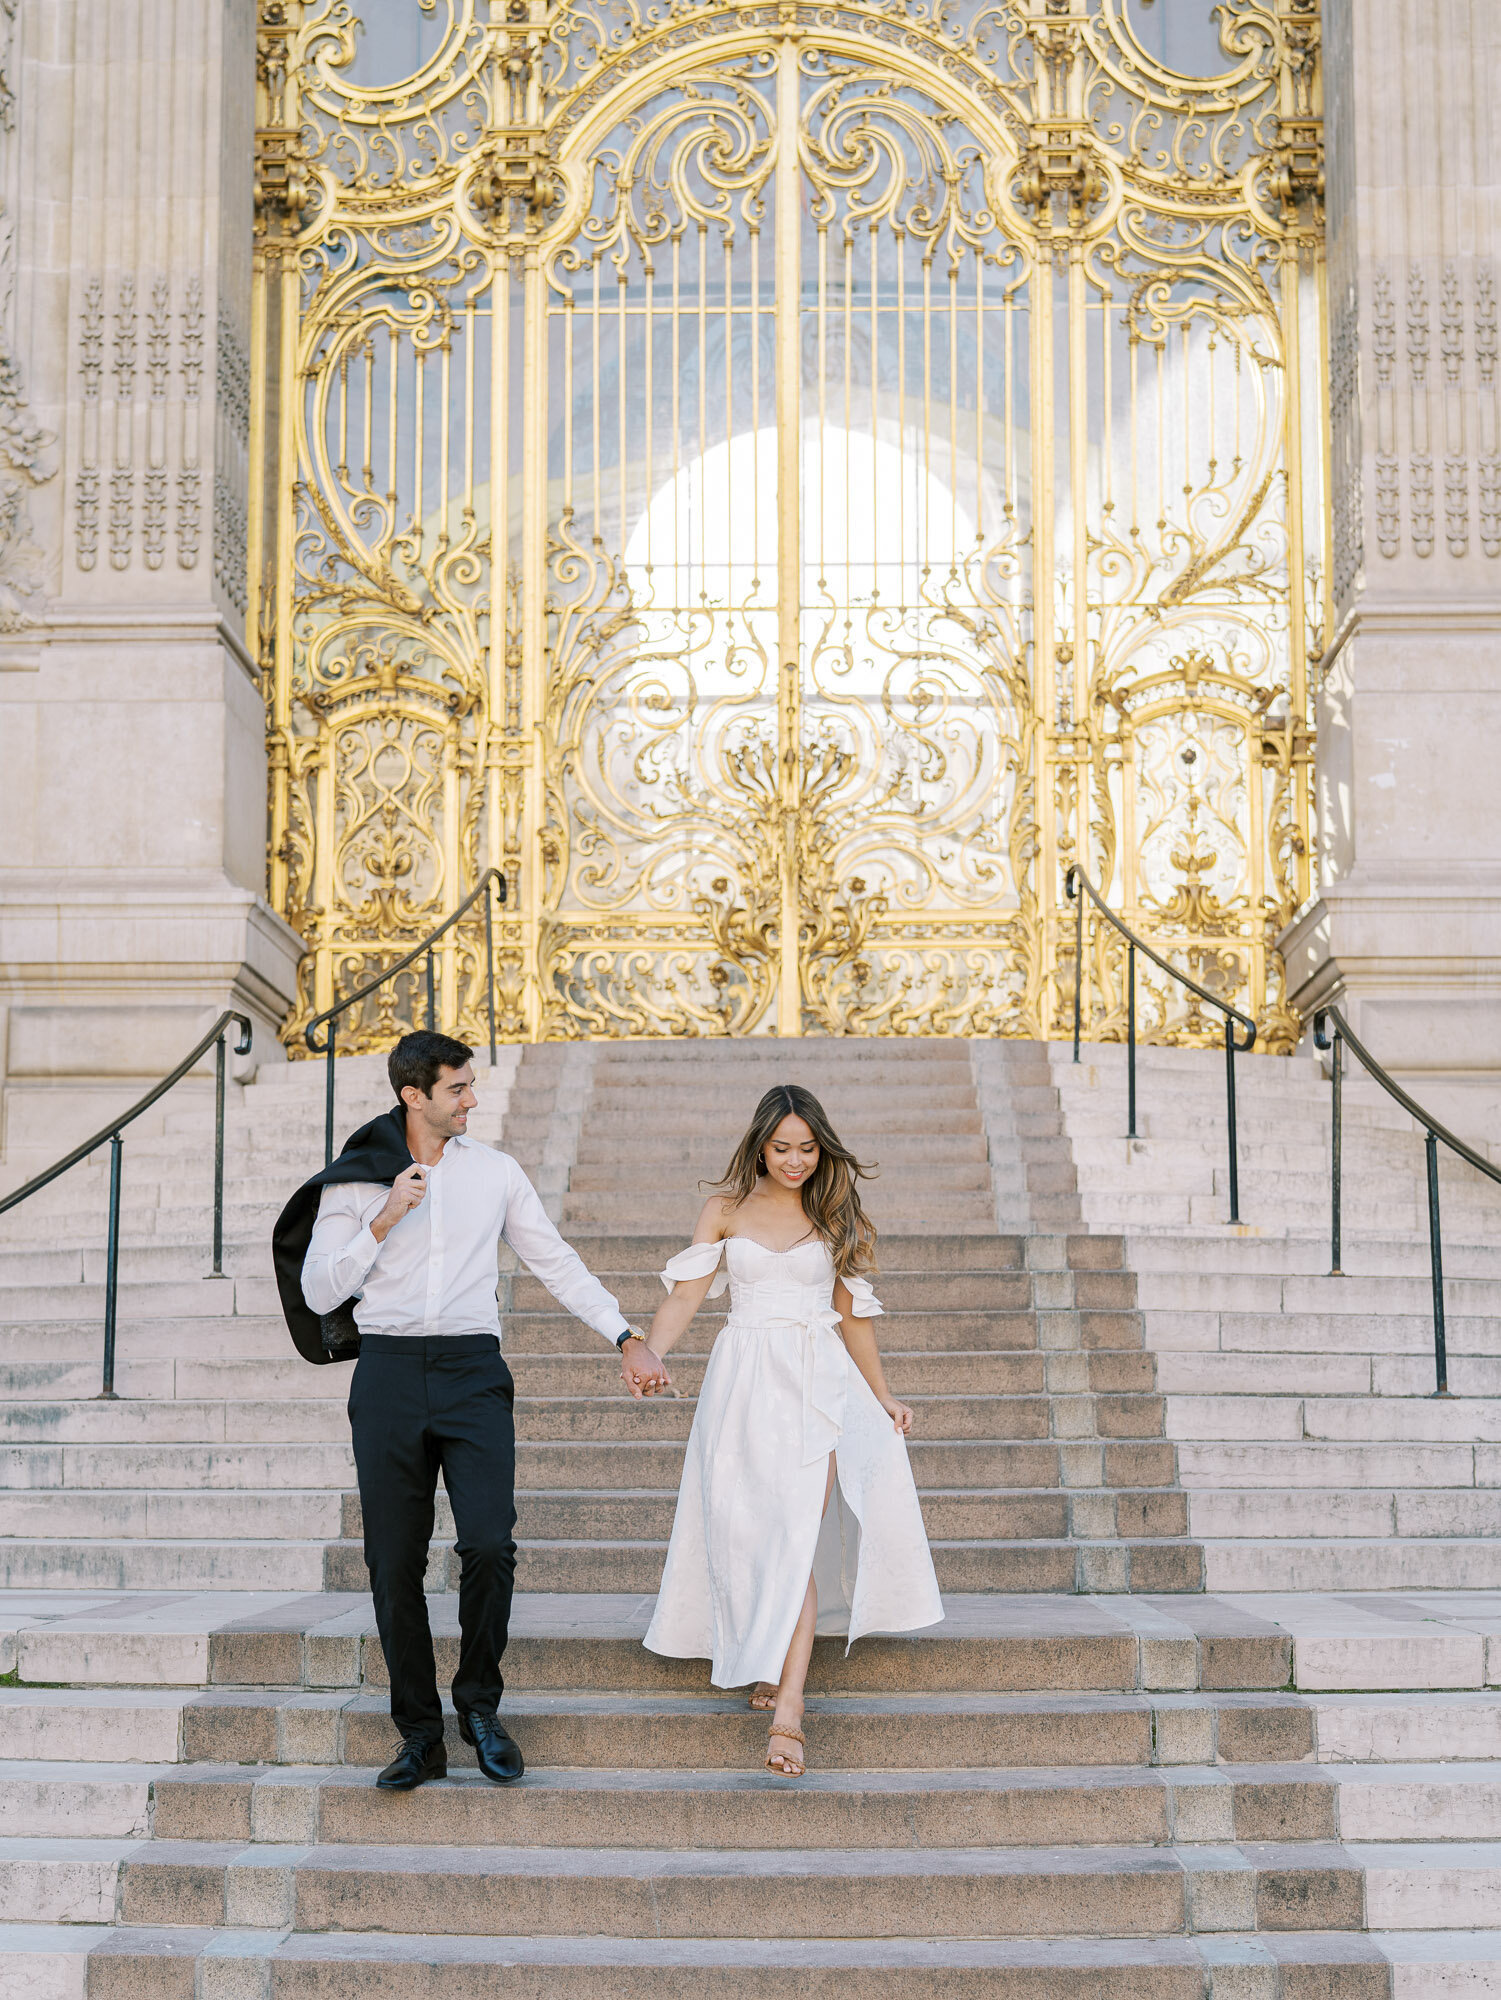 Christine & Kyle Paris Photosession by Tatyana Chaiko photographer in France-100